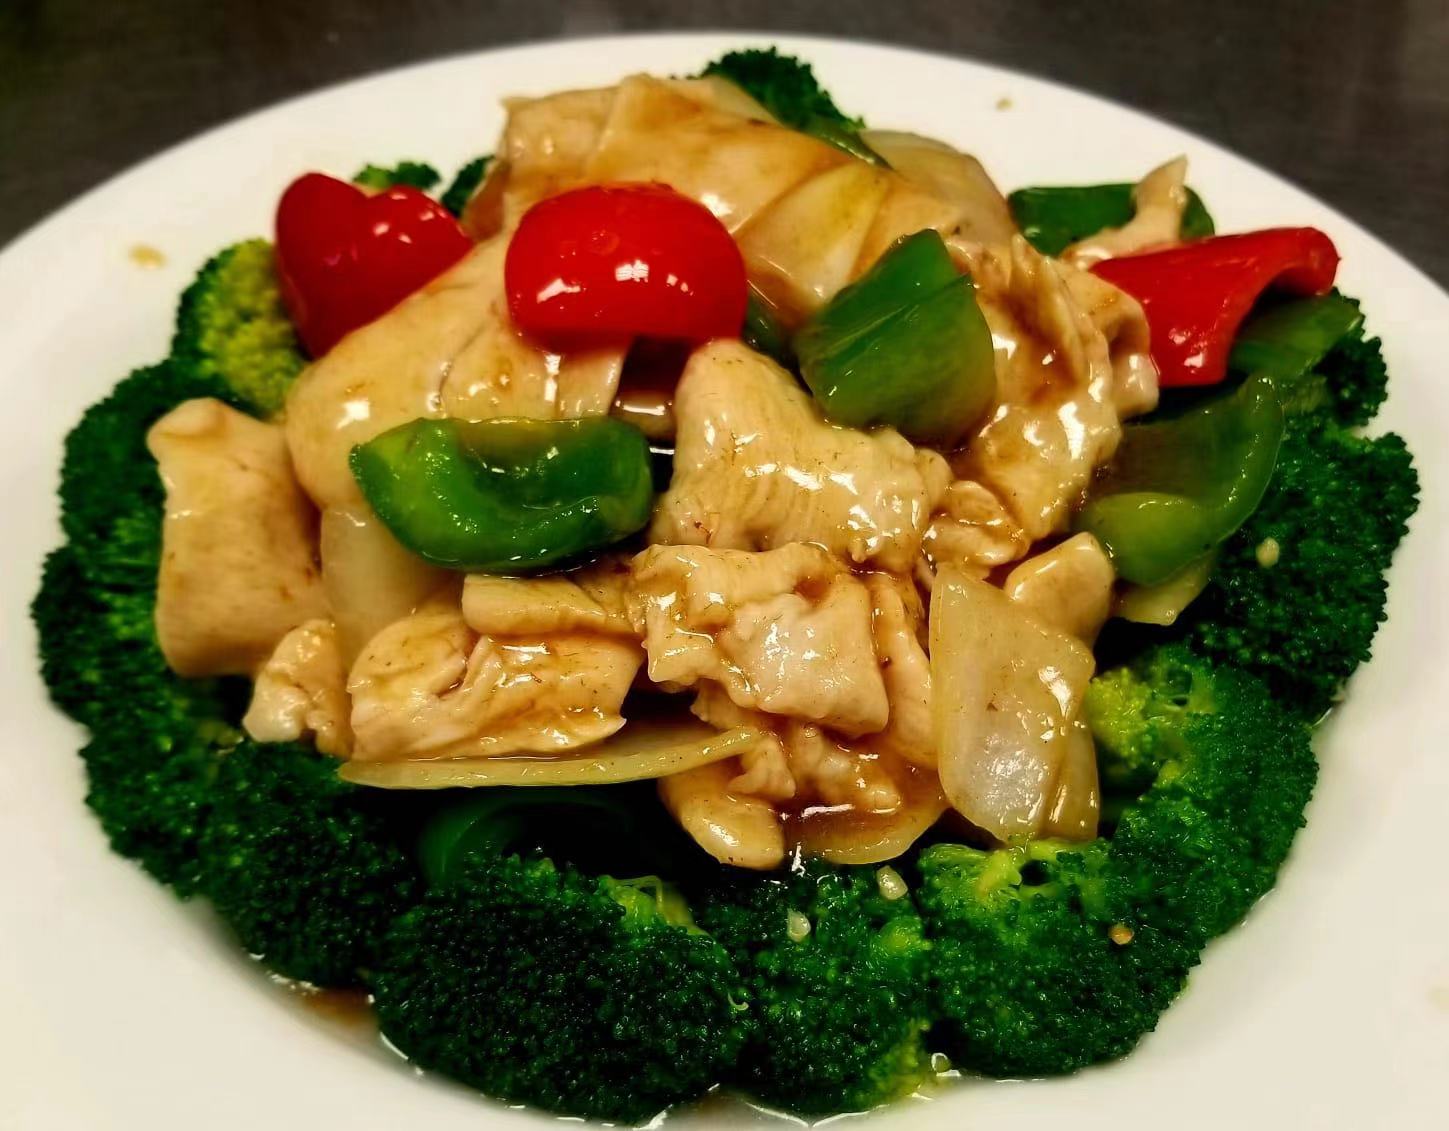 180. Chicken with Vegetable and Satay Sauce (HOT) (Contains Nuts)